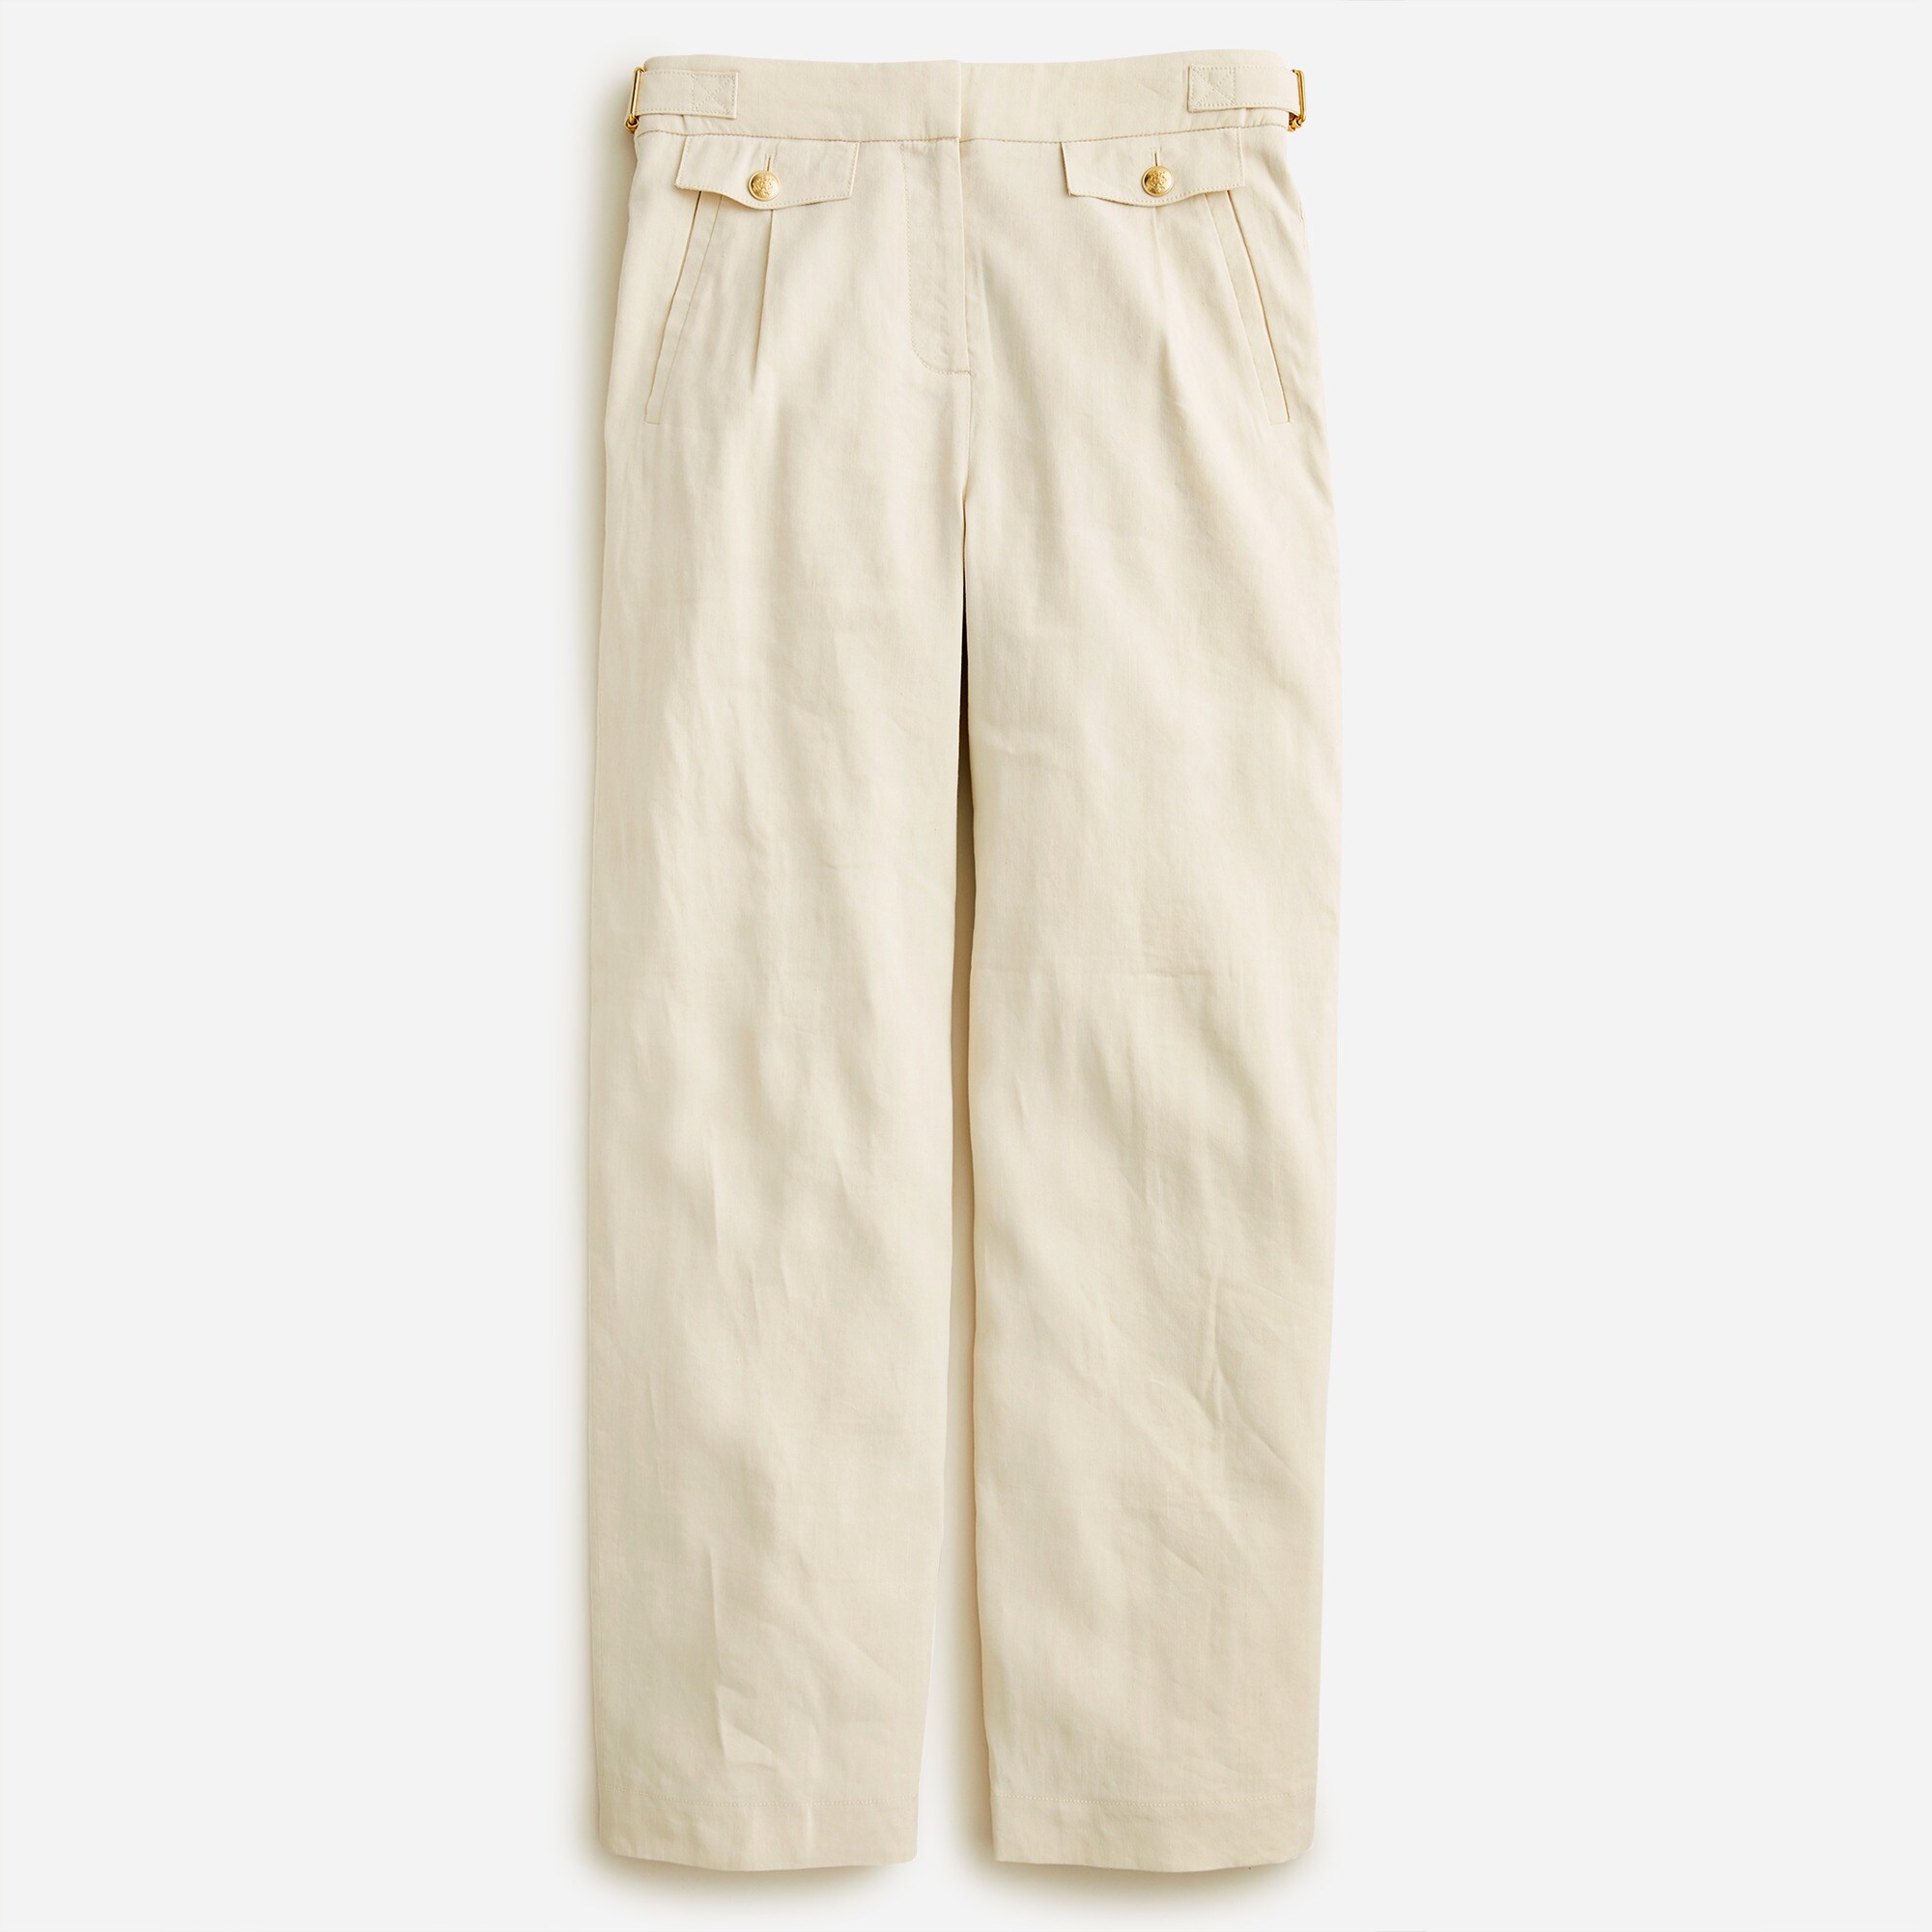  Tall Collection side-tab trouser in Italian linen blend